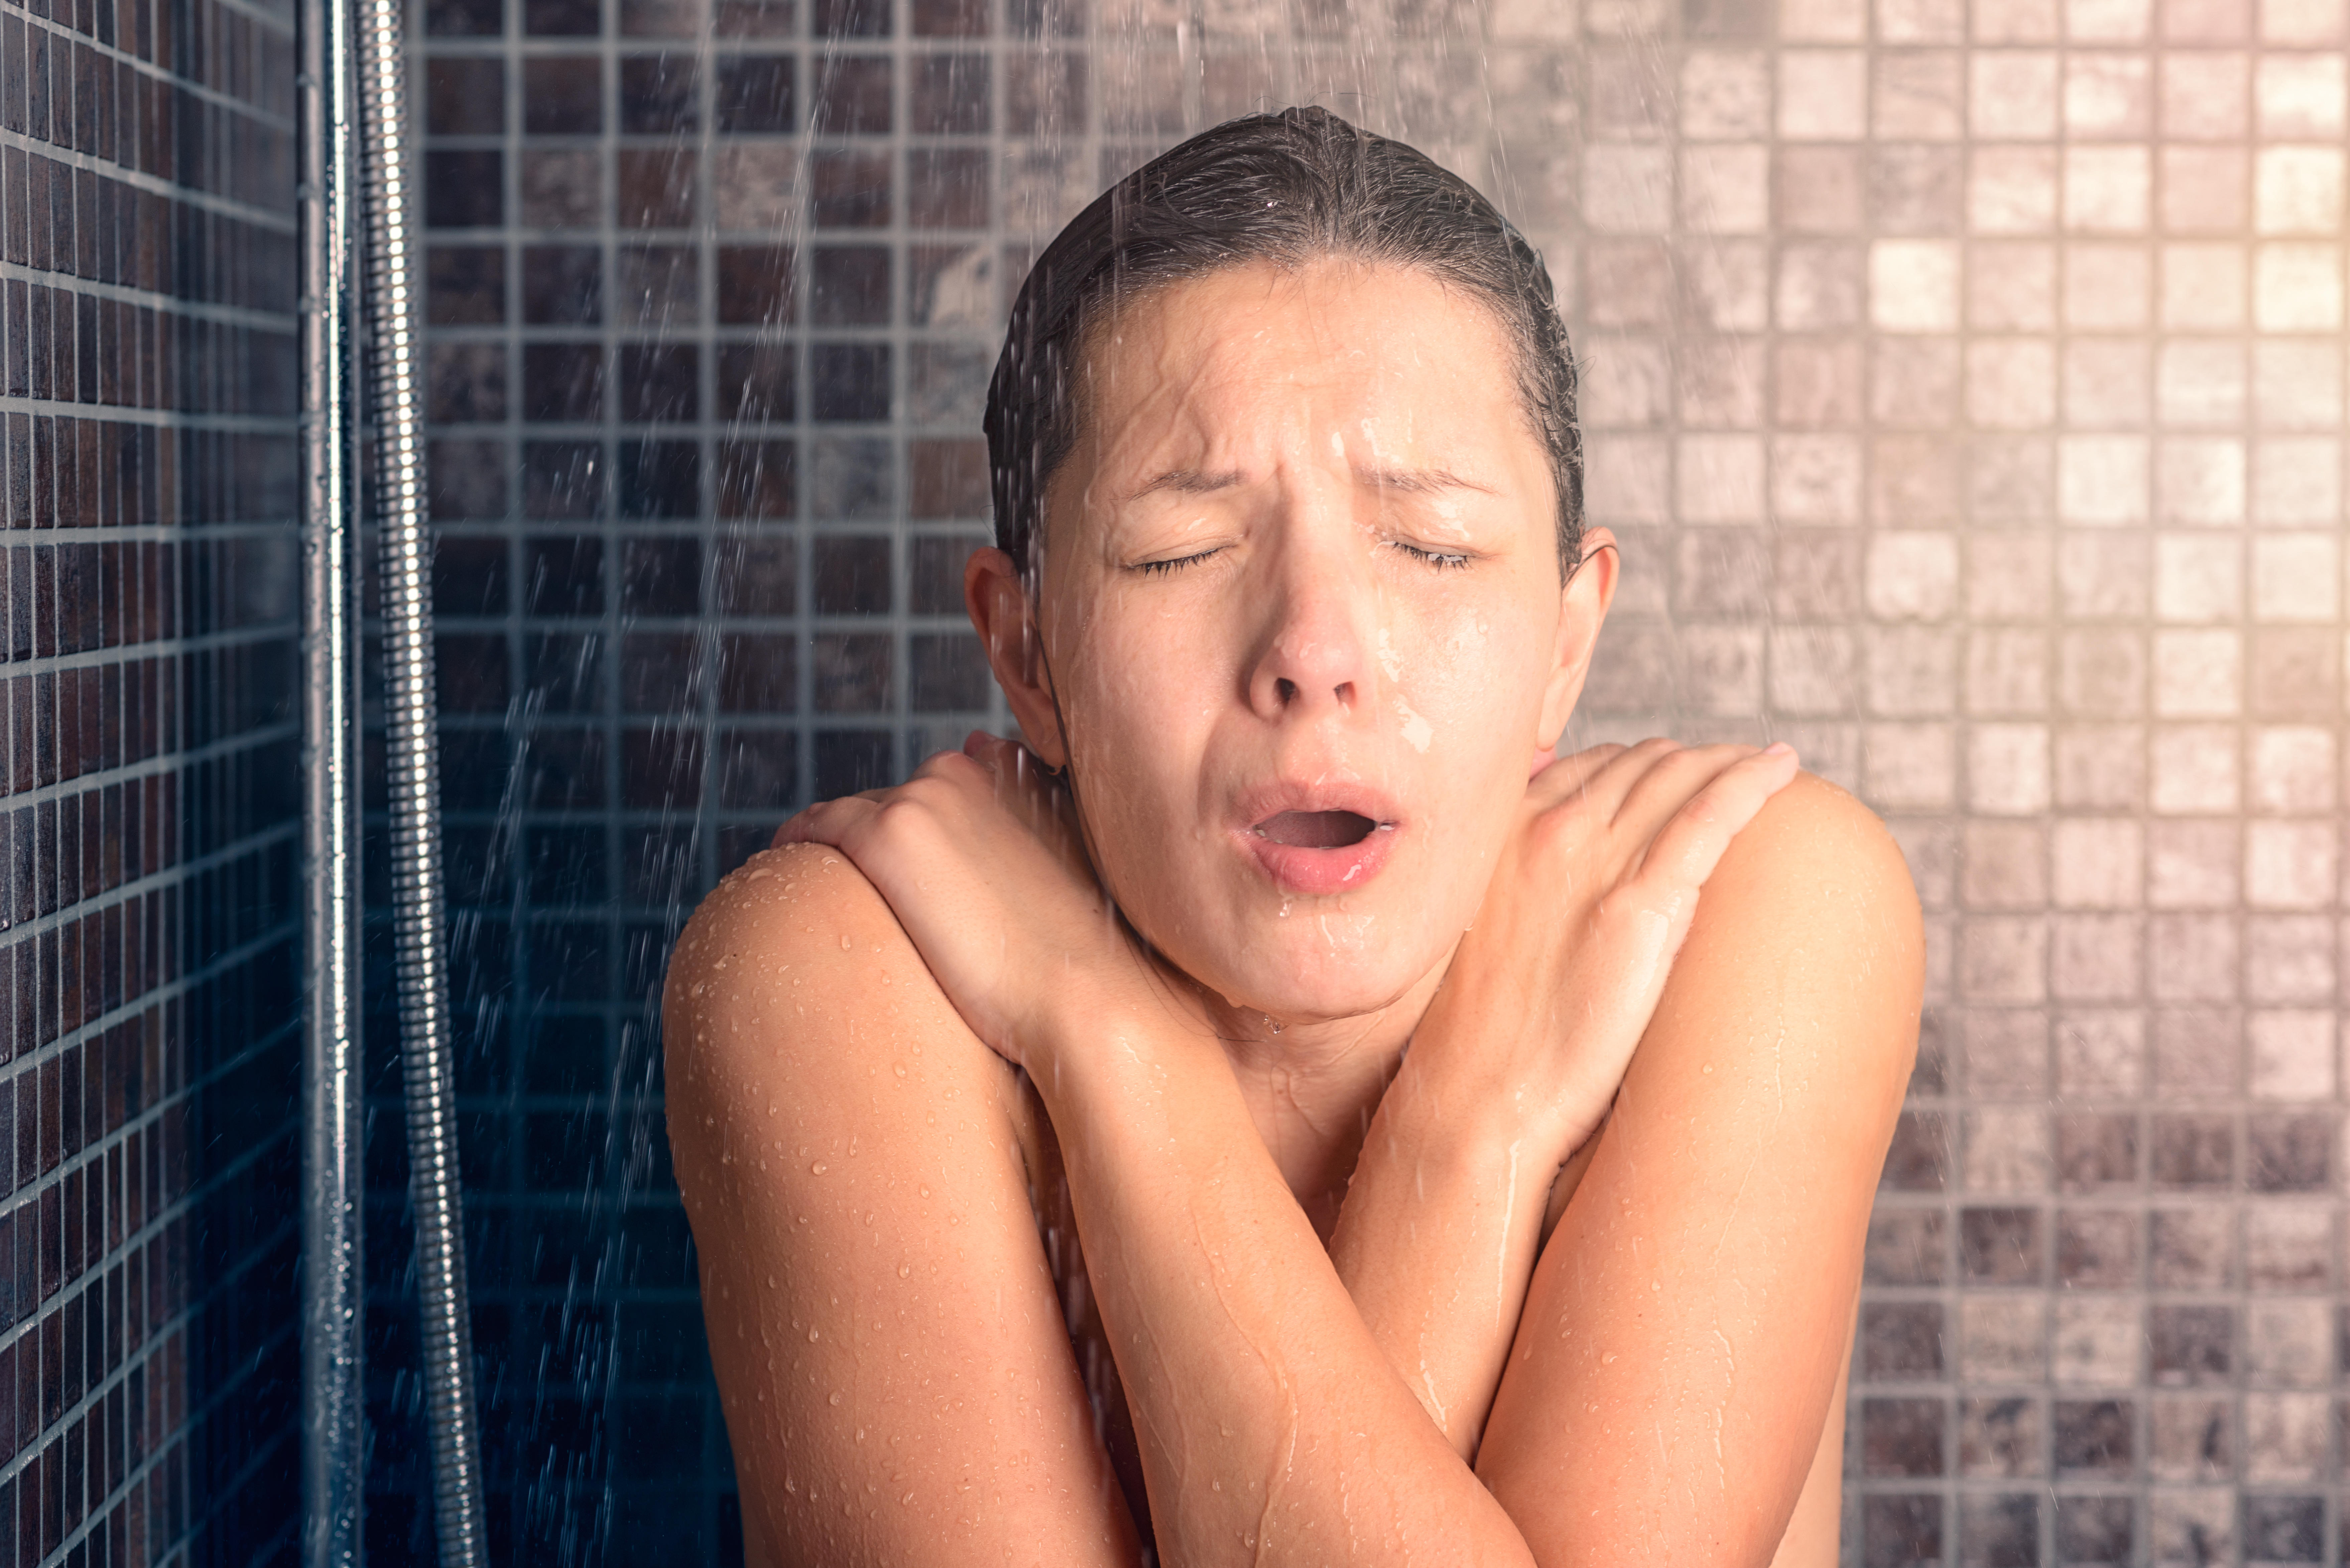 Woman shivering in cold water